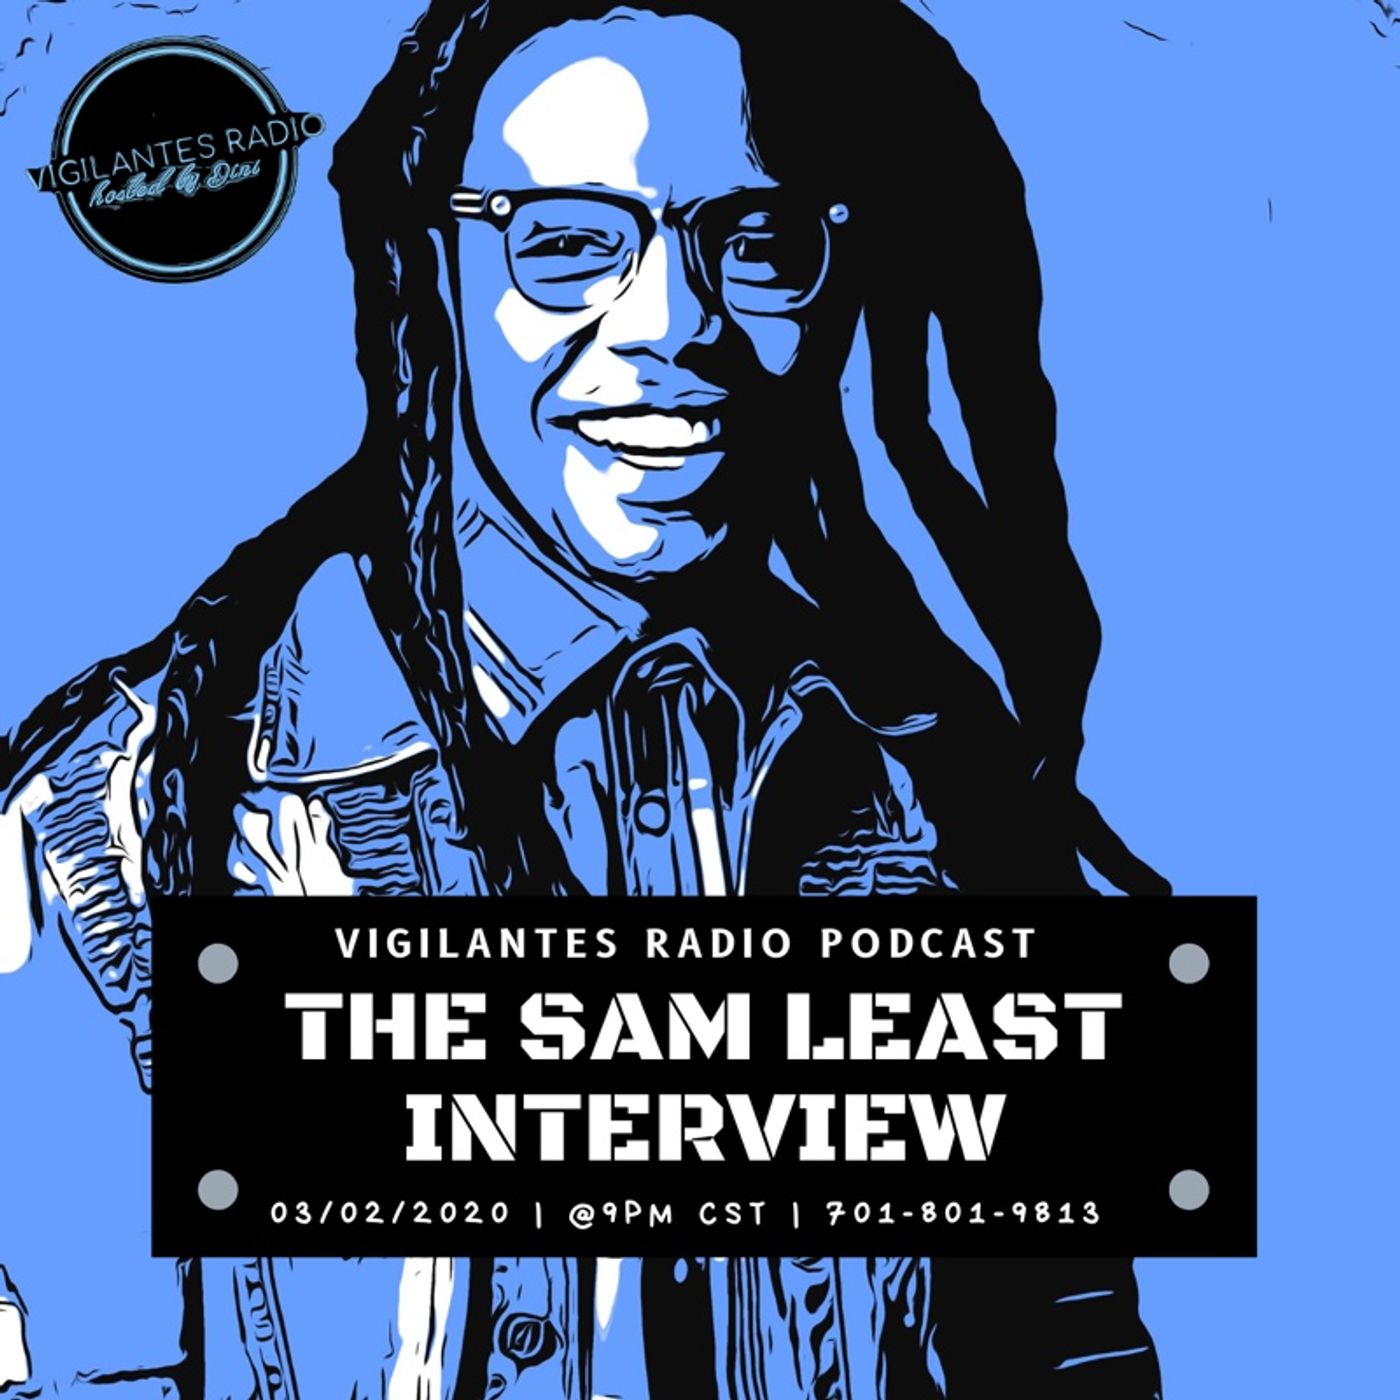 The Sam Least Interview. Image